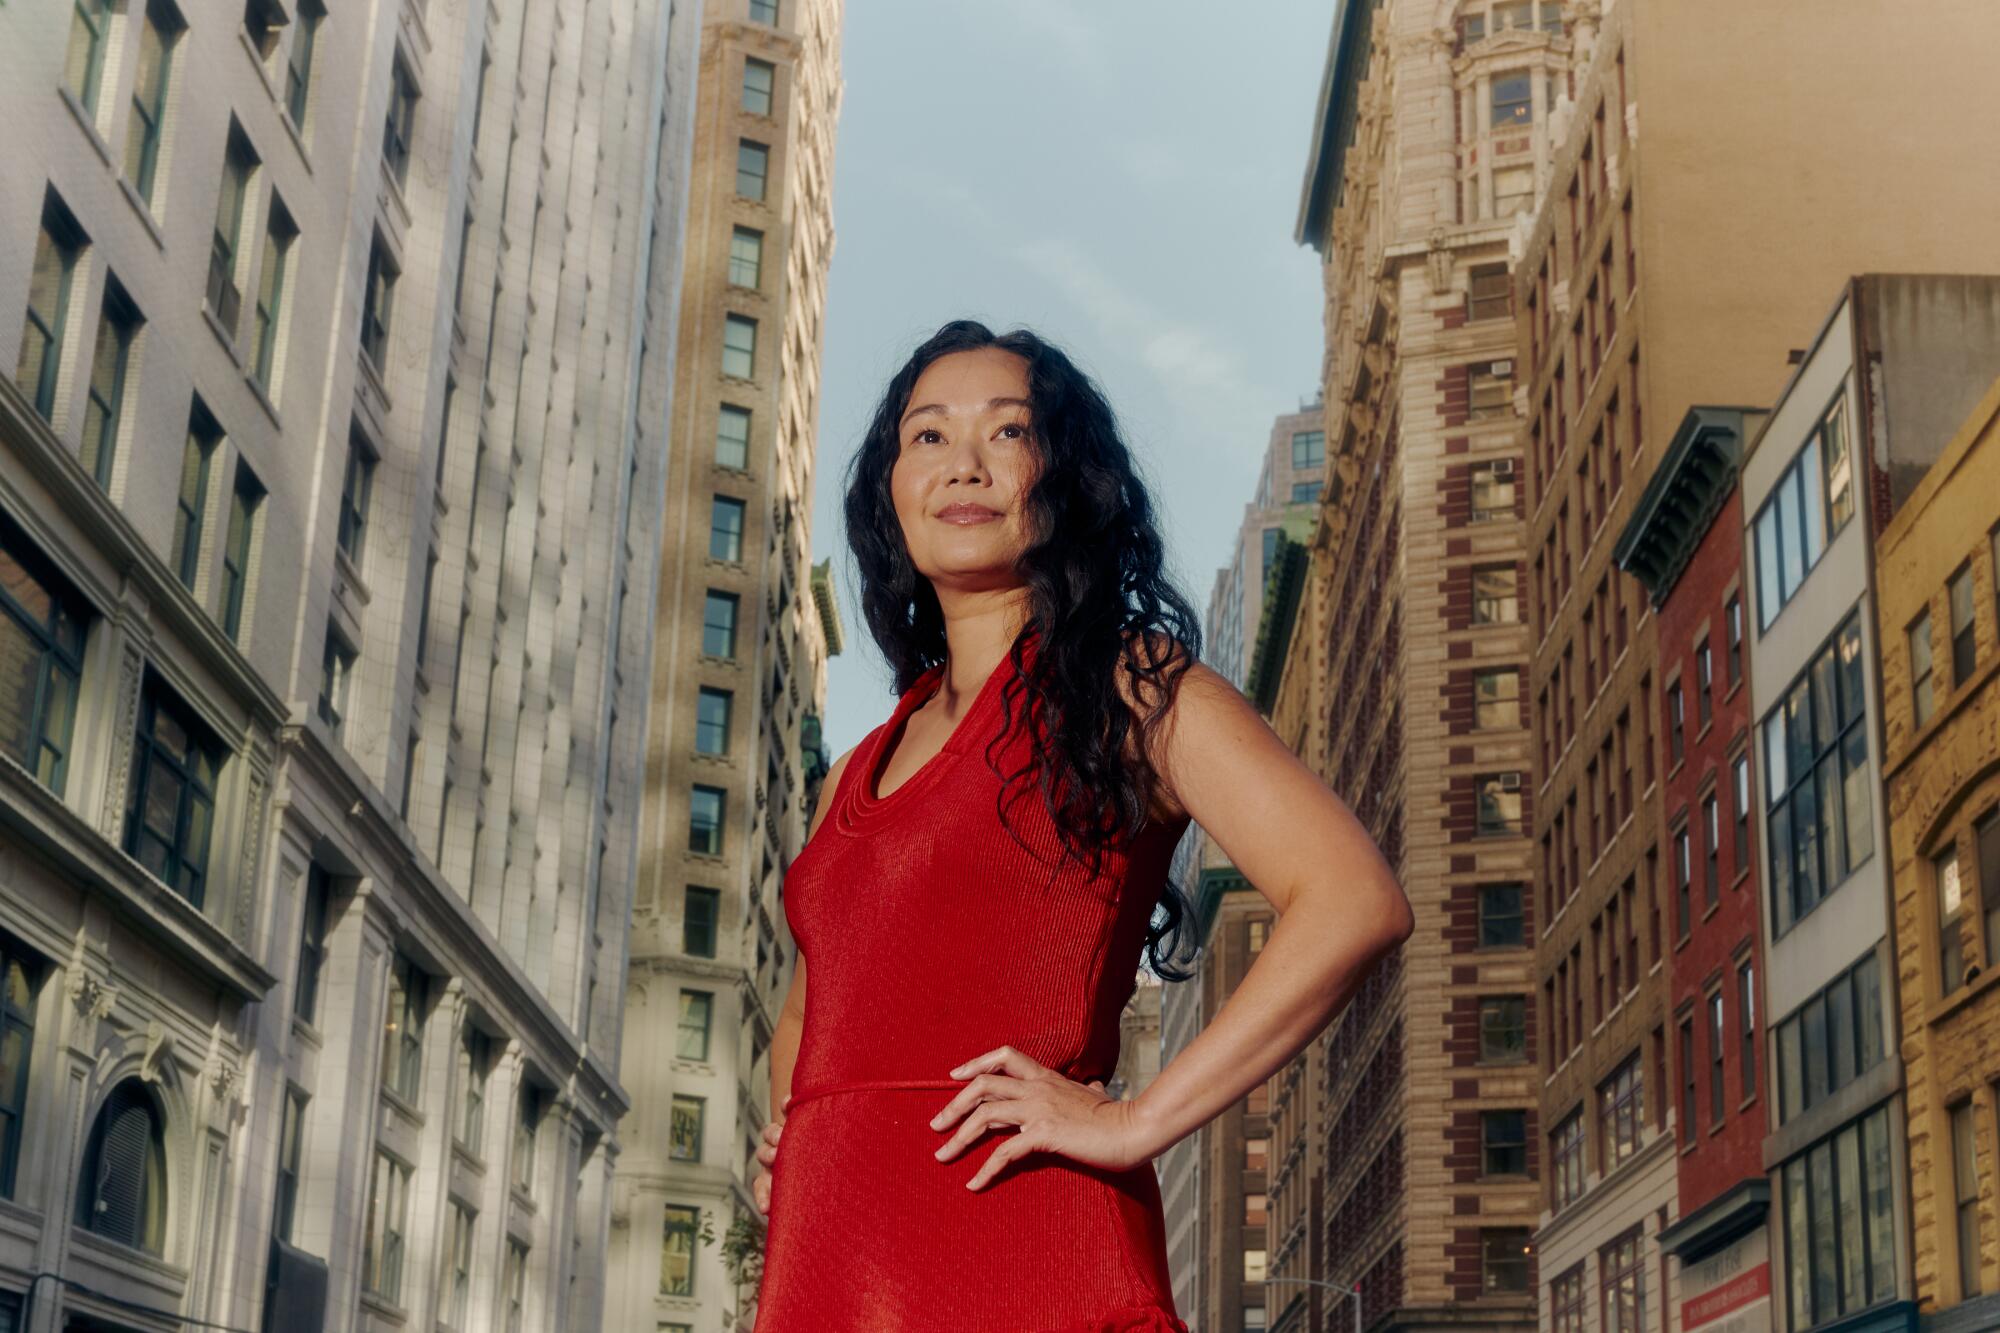 Hong Chau stands in a New York City street in a red dress for a portrait.